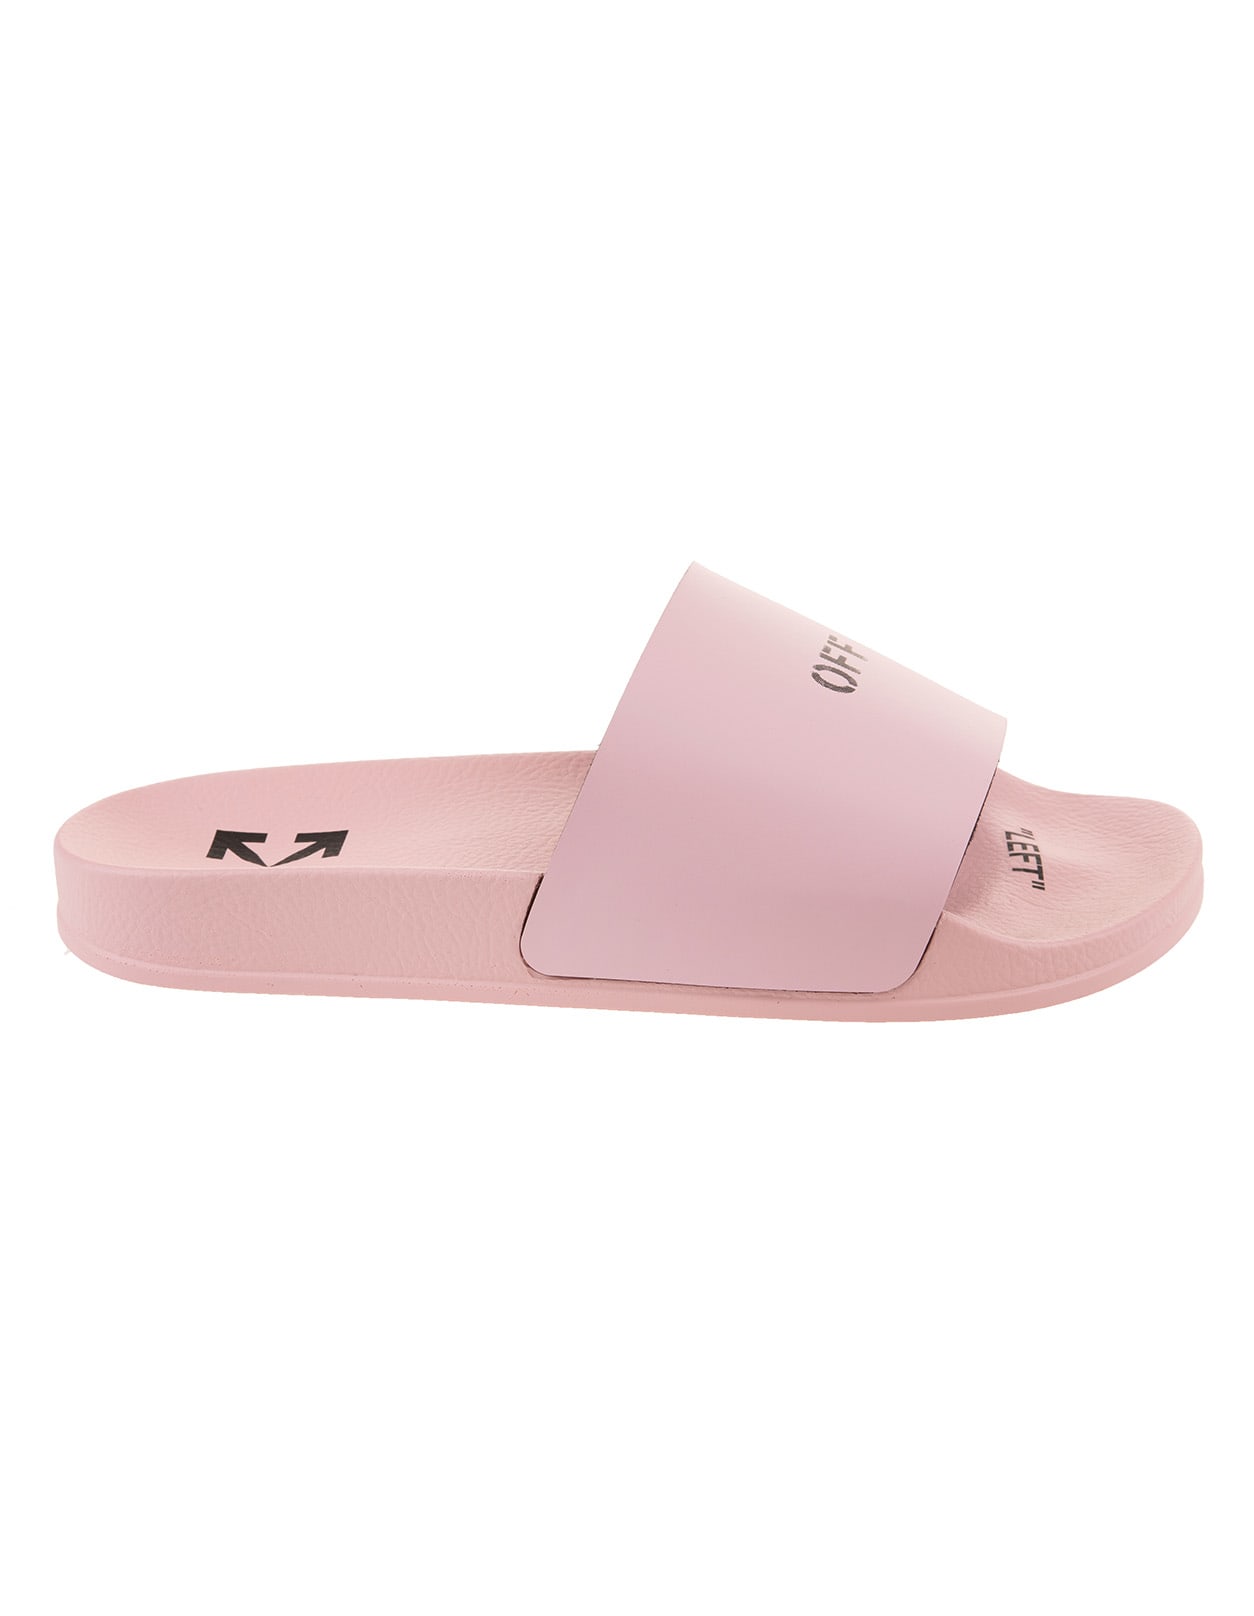 Off-White Woman Pink And Black off Slippers